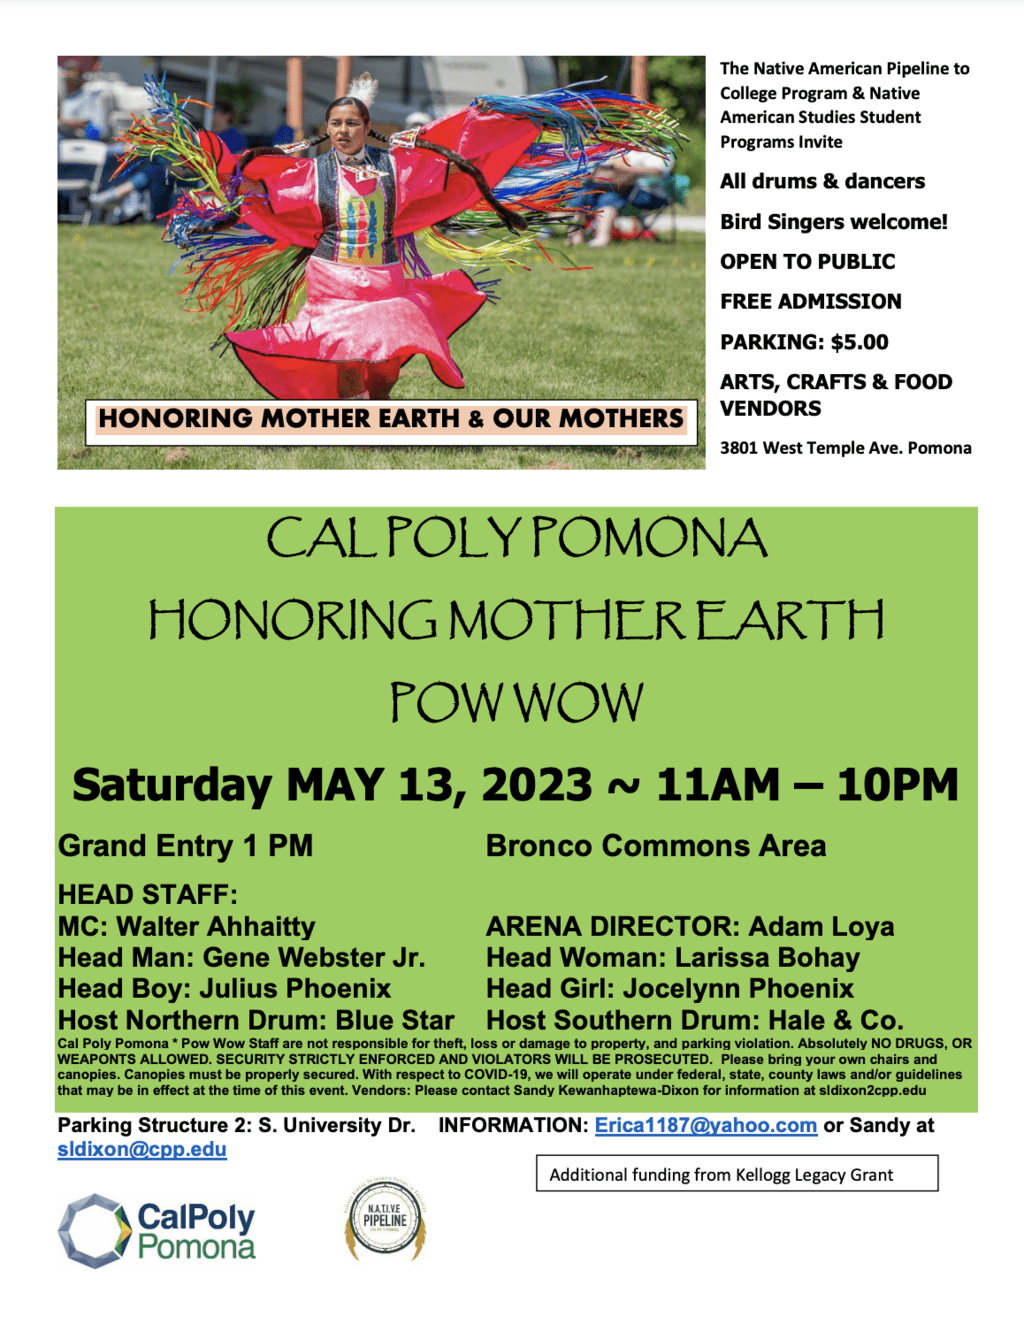 Cal Poly Pomona Honoring Mother Earth Pow Wow 2023